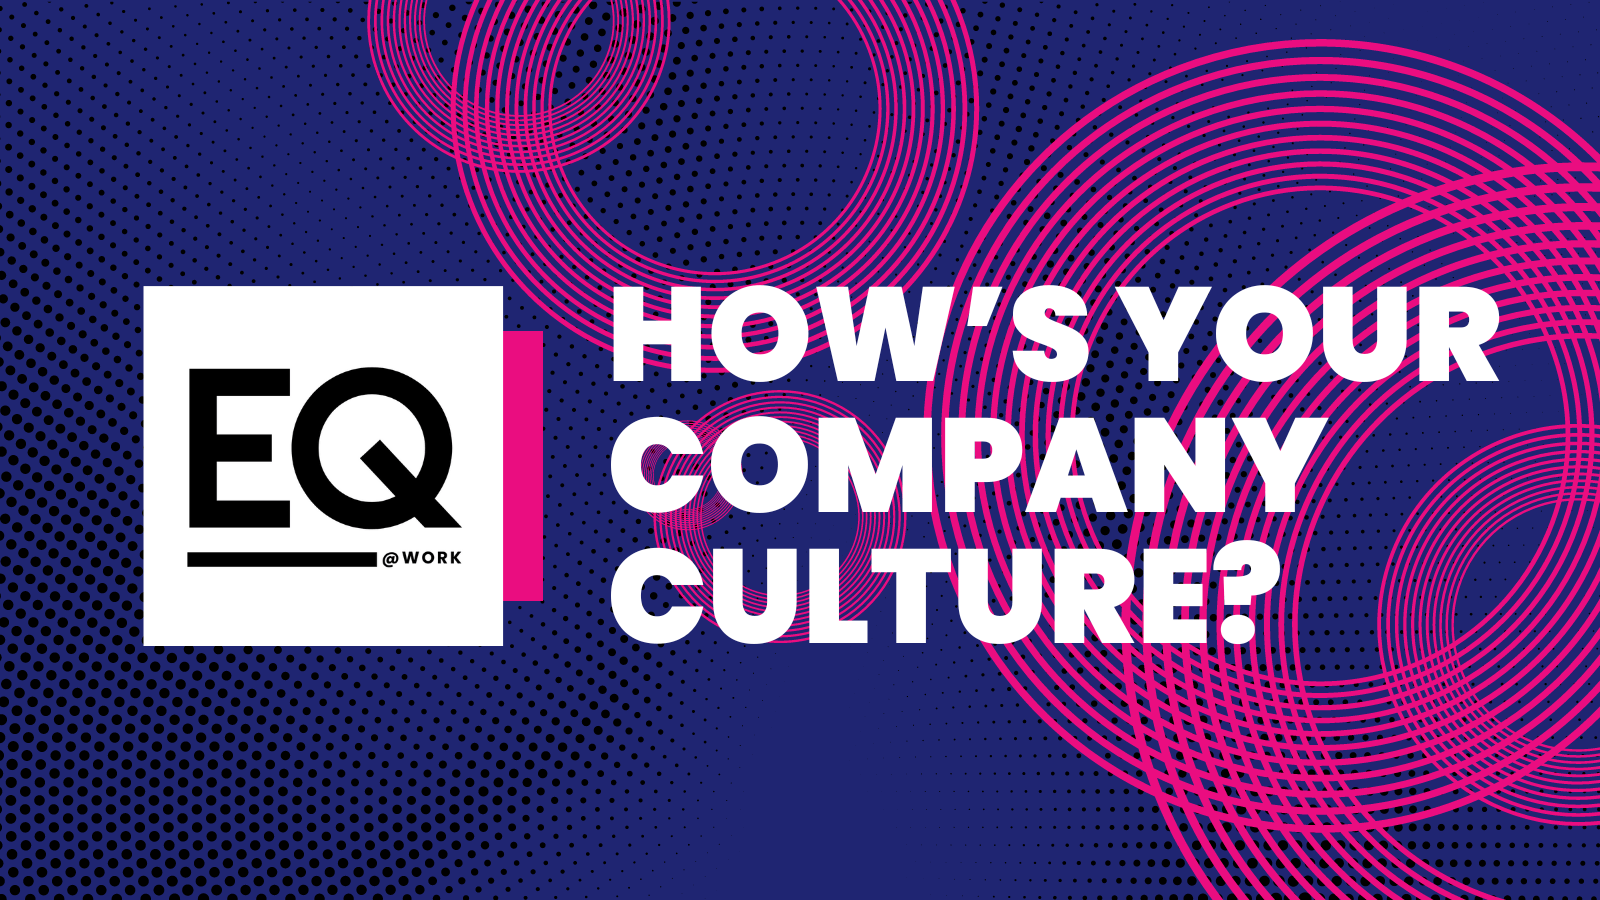 How is YOUR Company Culture?